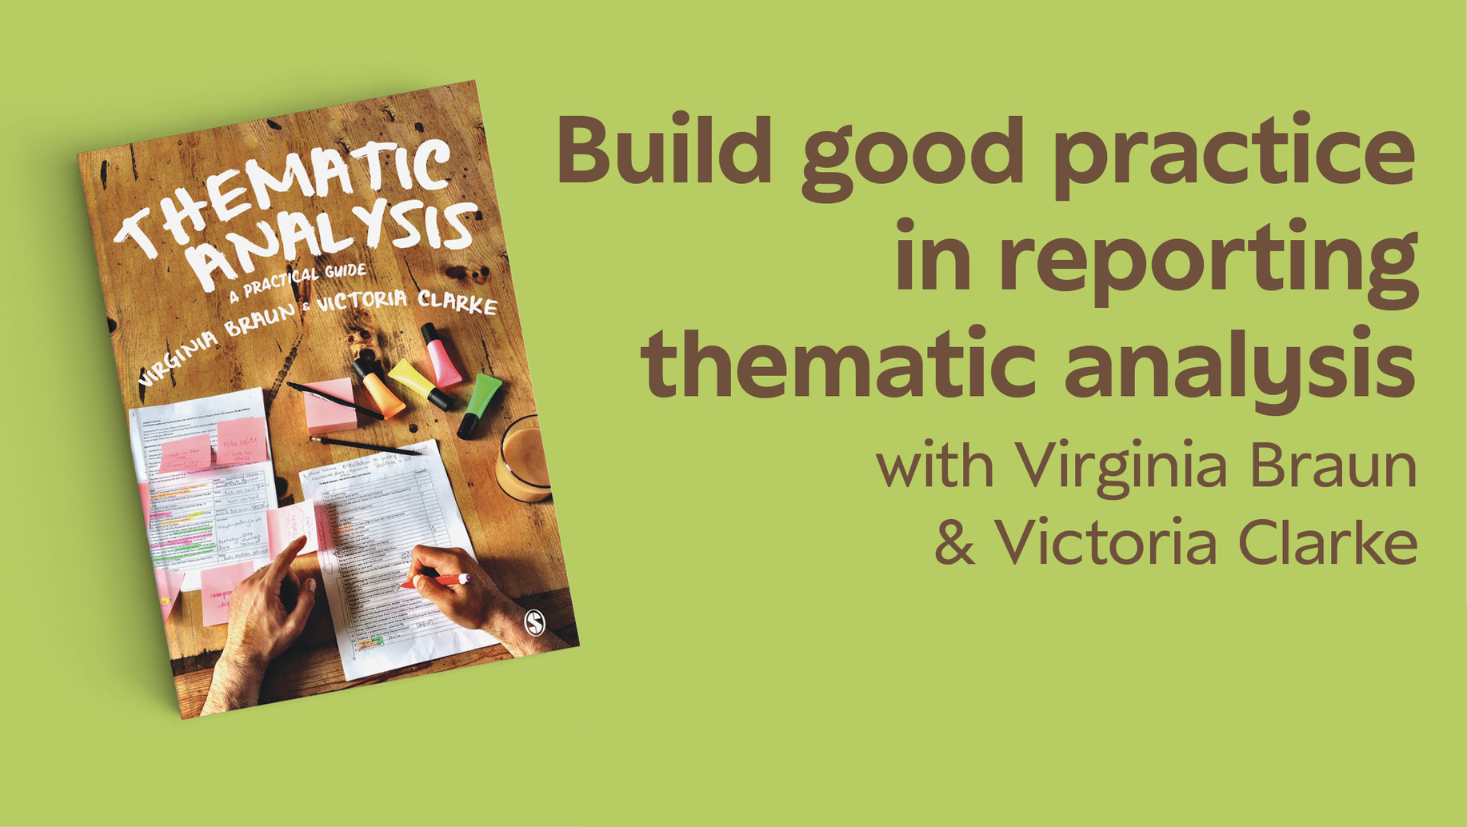 Build good practice in reporting Thematic Alaysis with Virginia Braun & Victoria Clarke